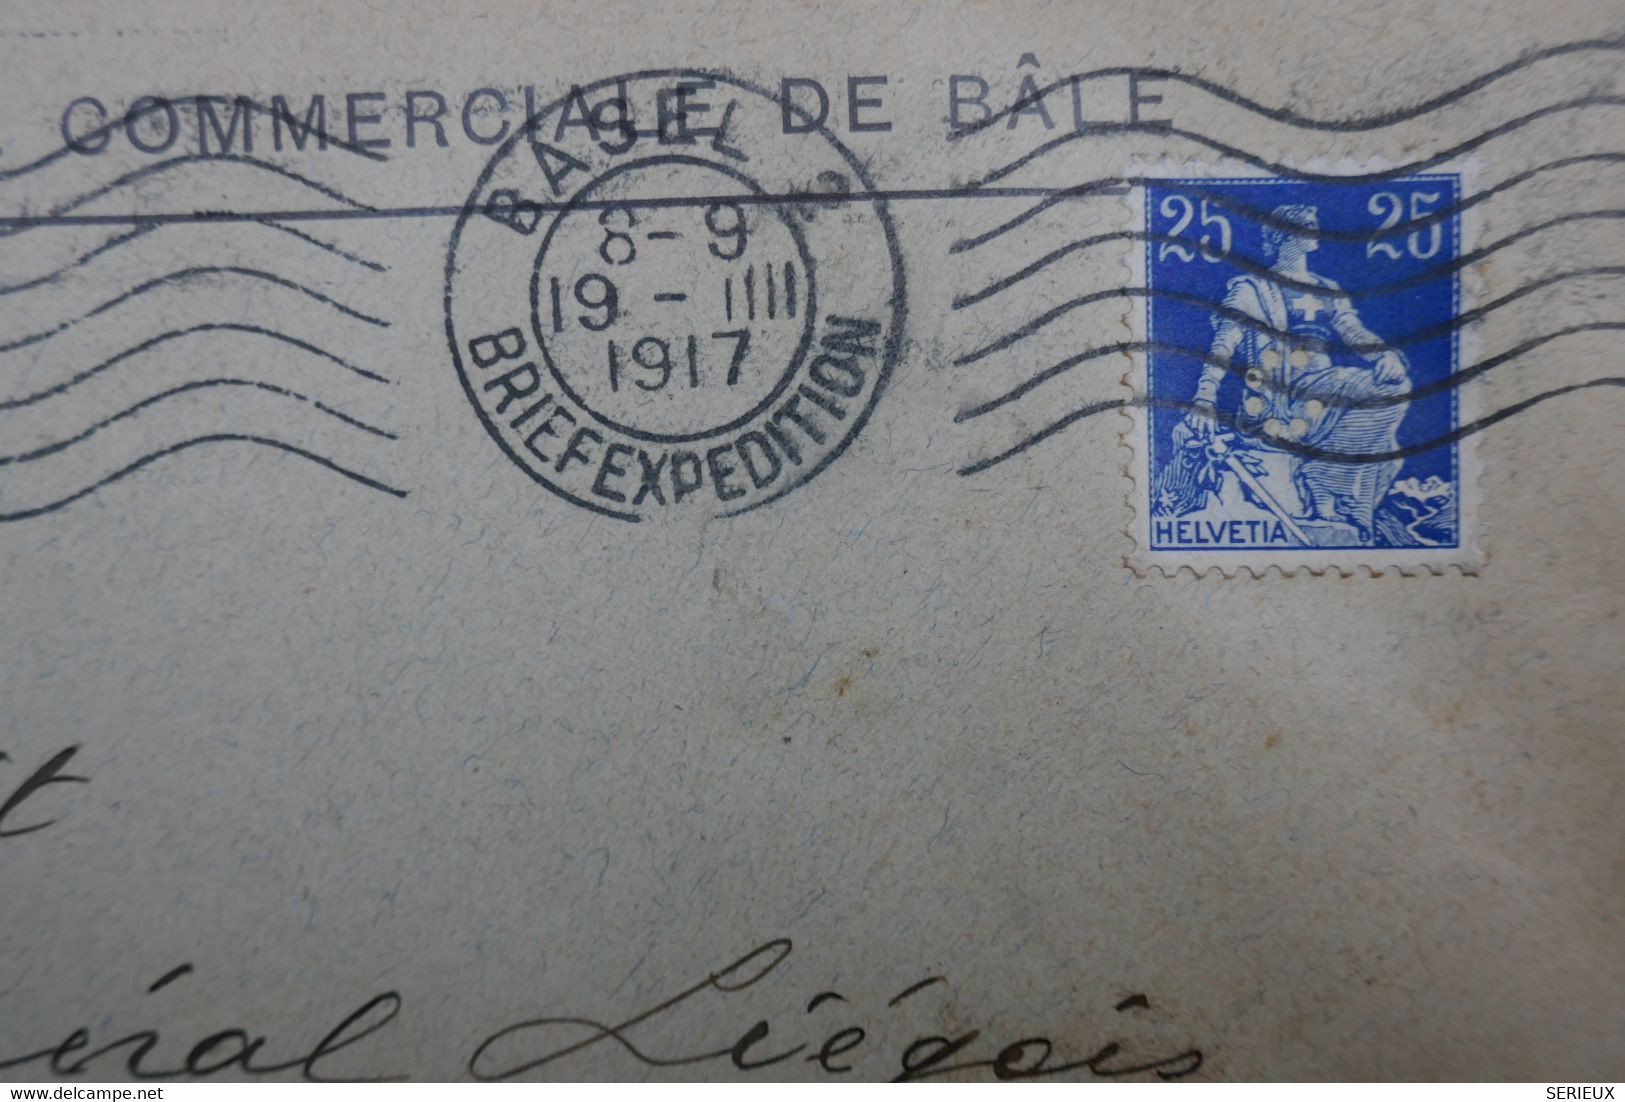 R11 SUISSE BELLE LETTRE TIMBRE PERFORATED 1917 BASEL A BRUSSSEL+ PERFORé + AFFRANCH PLAISANT - Perfin